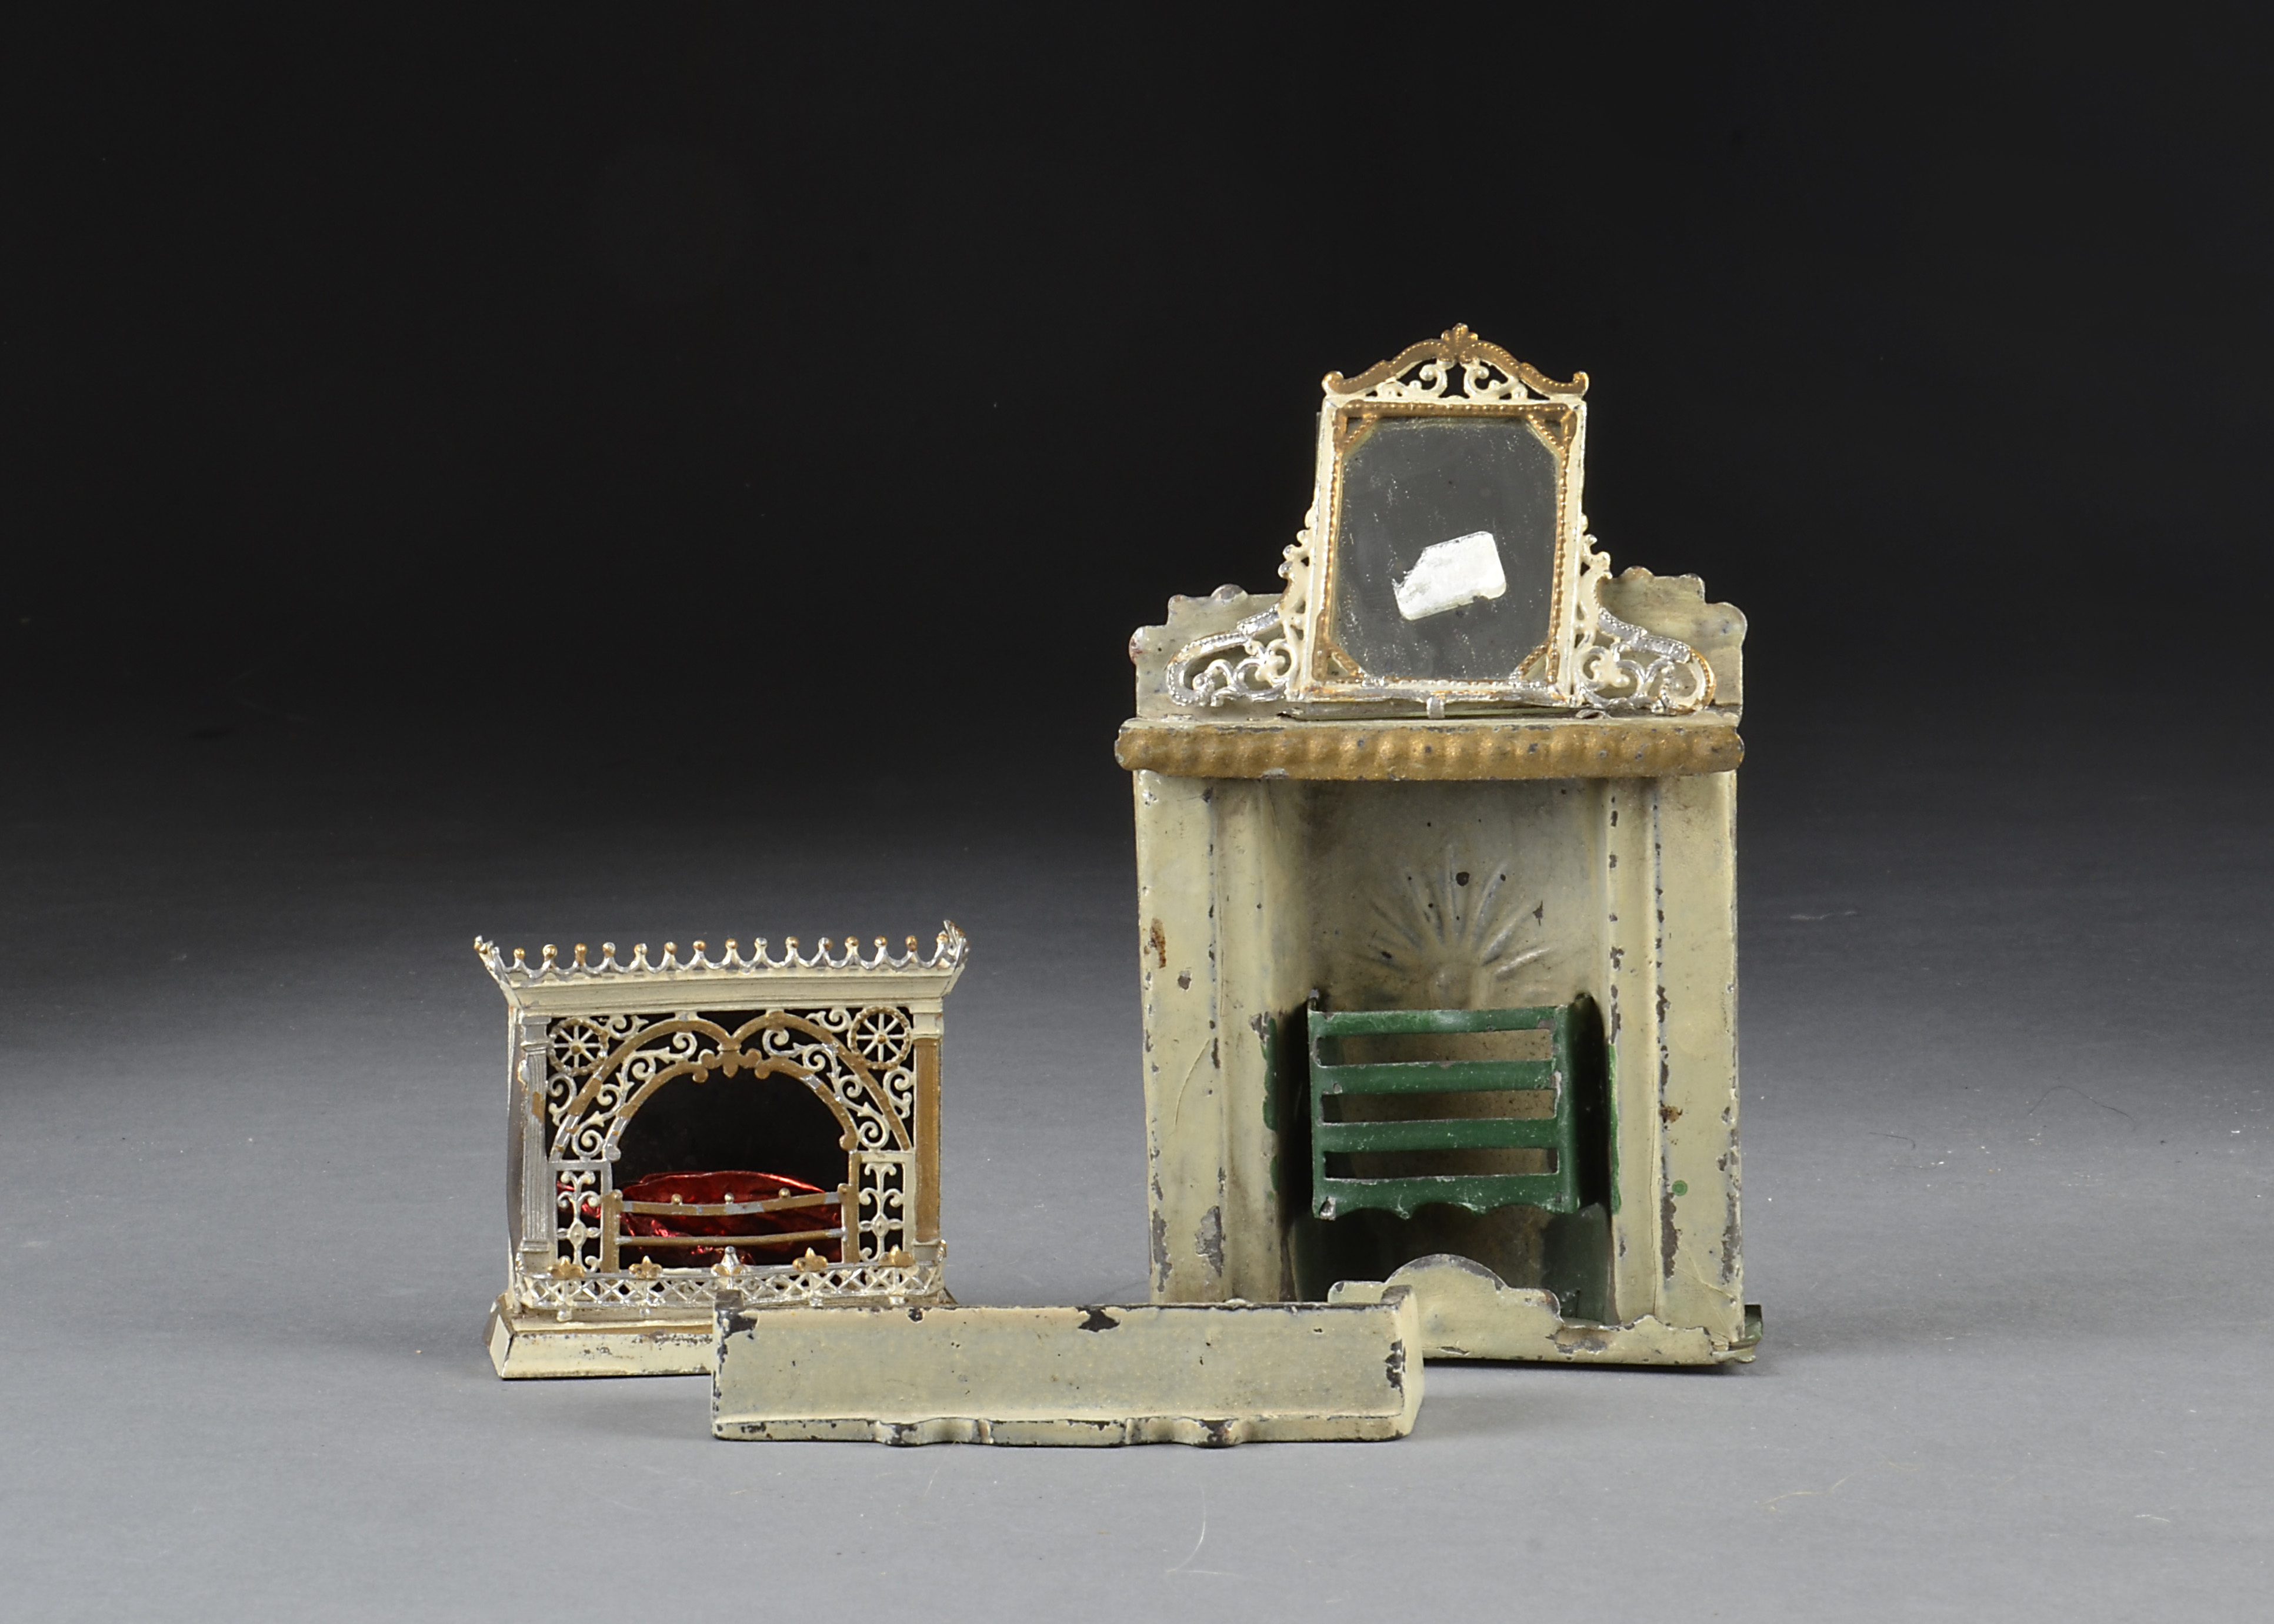 An Evans & Cartwright tinplate fireplace, cream and gold with green grate - 43?4in. (12cm.) high;